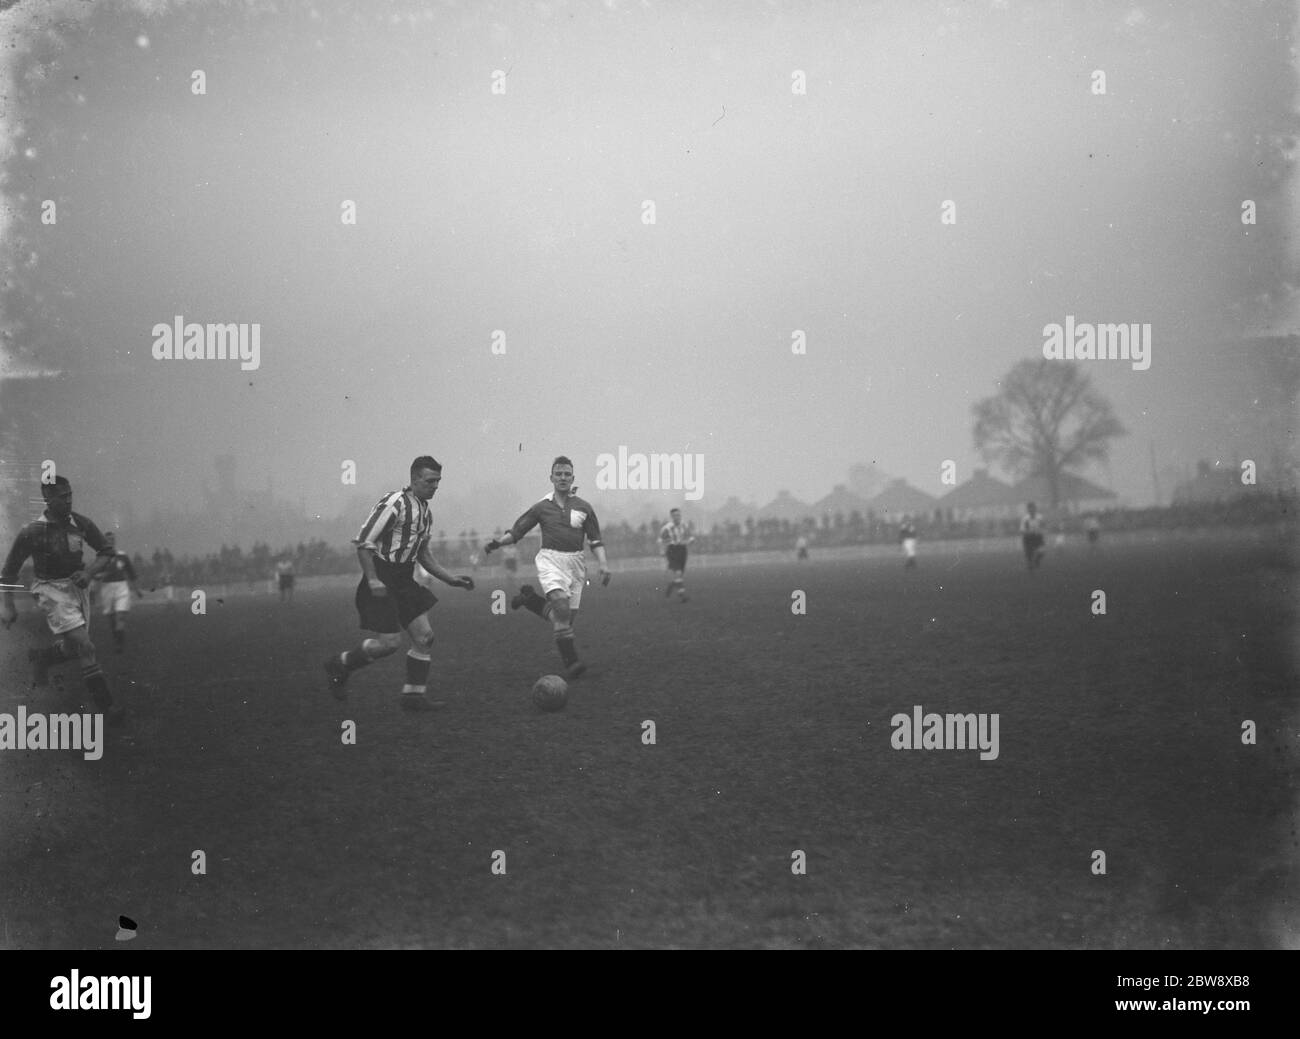 Dartford football club versus Peterborough United Football Club . Two players compete for the ball . 1936 Stock Photo